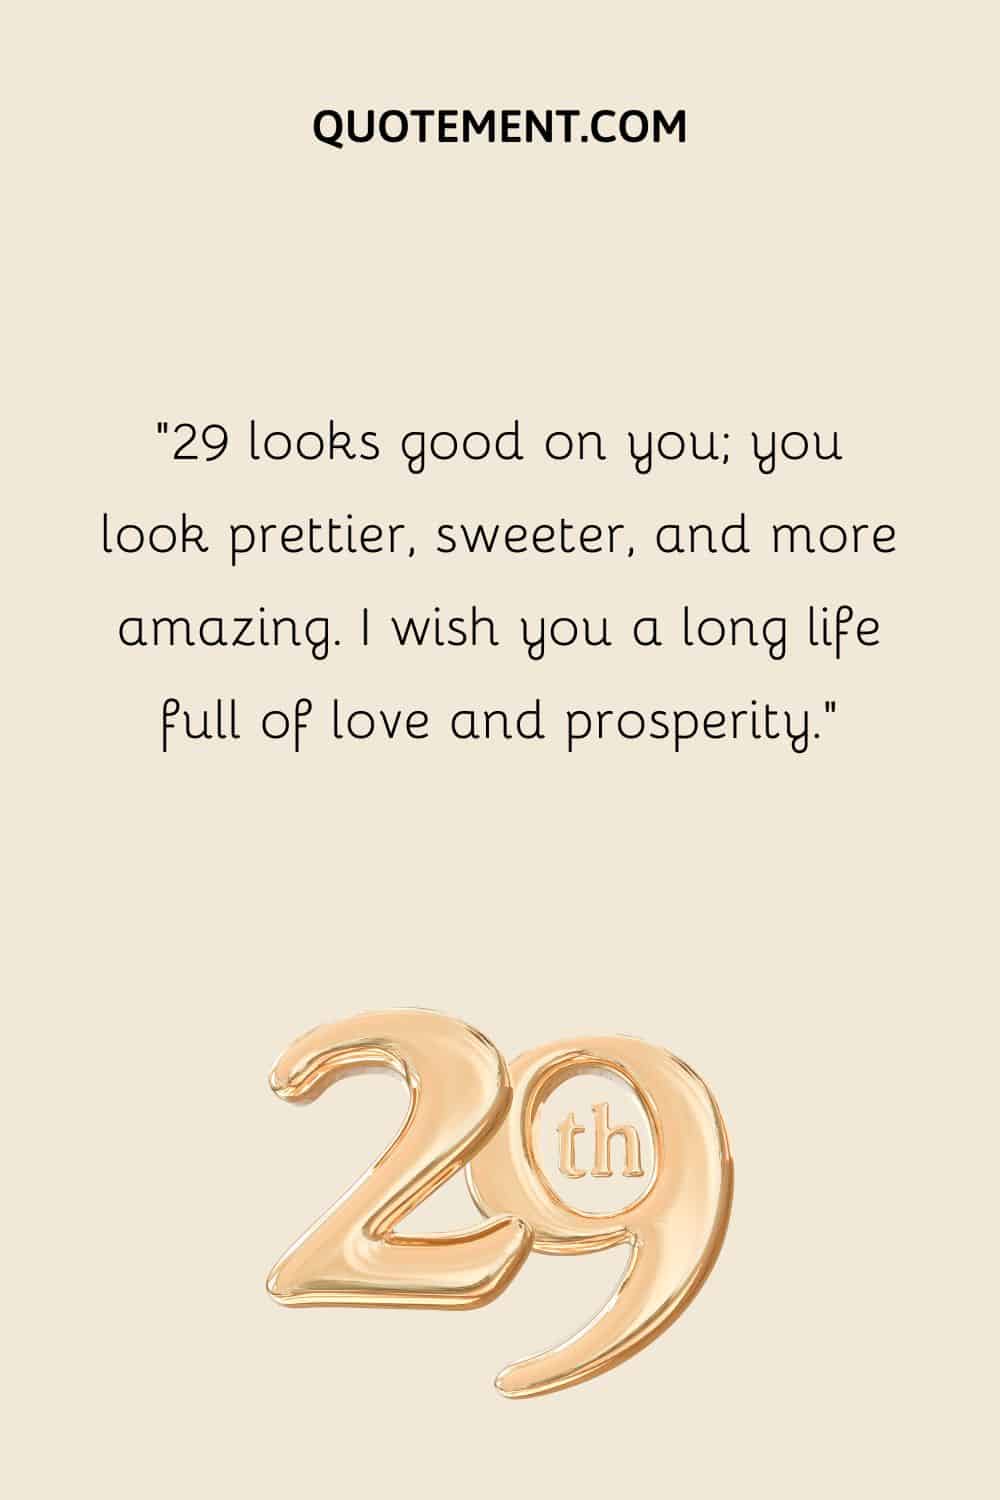 29 looks good on you; you look prettier, sweeter, and more amazing